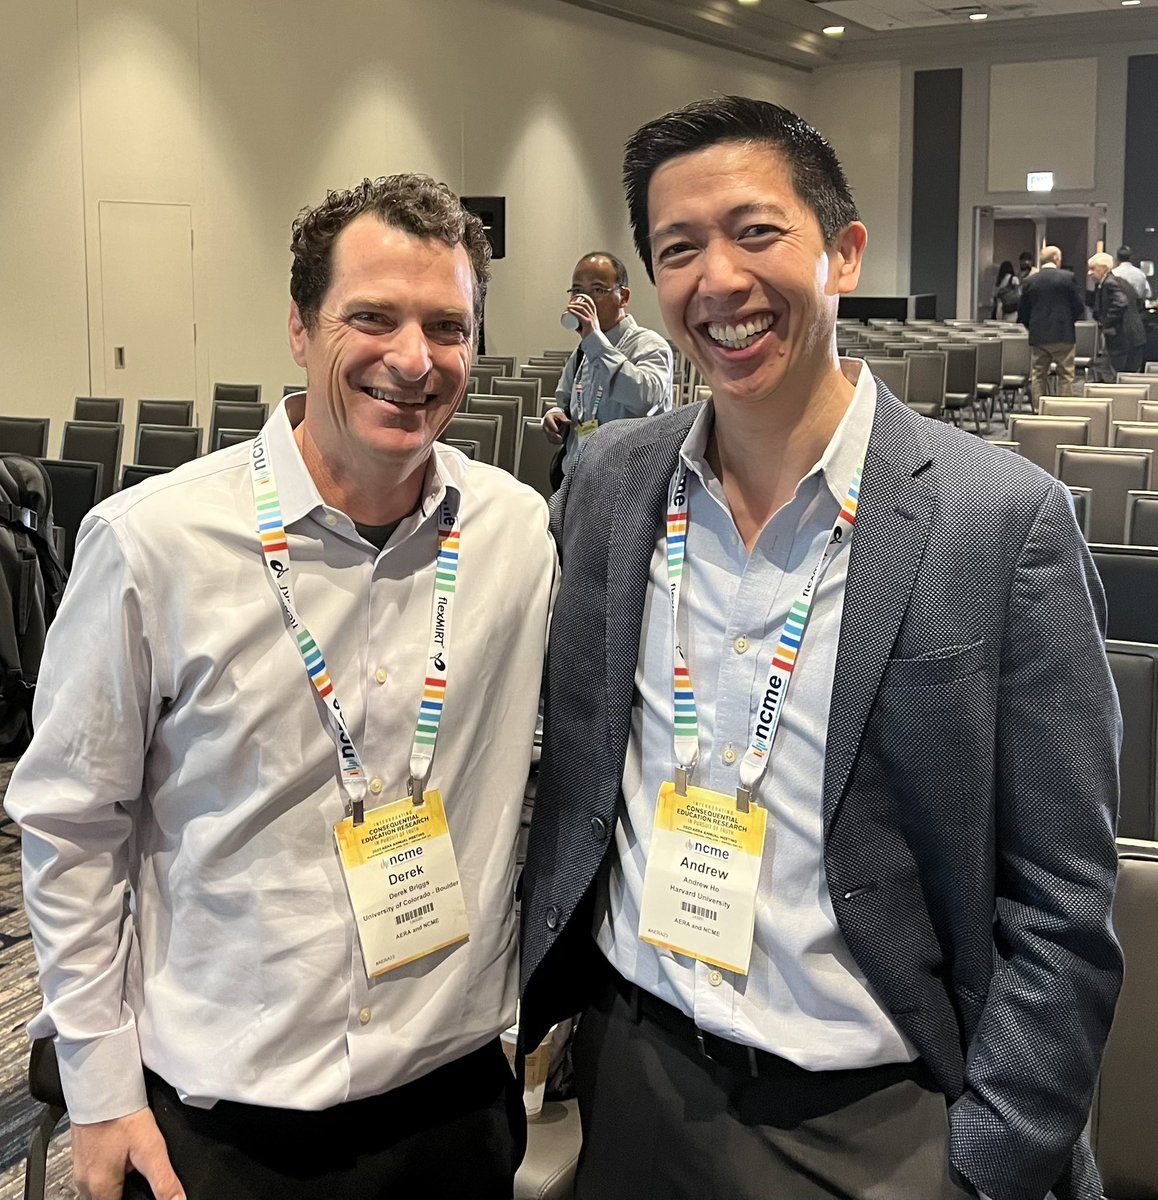 Past president @DerekCBriggs and future president @AndrewDeanHo in a moment of full consensus on a rewarding experience presenting the report from our NCME Taskforce on Foundational Competencies of Educational Measurement #NCME23